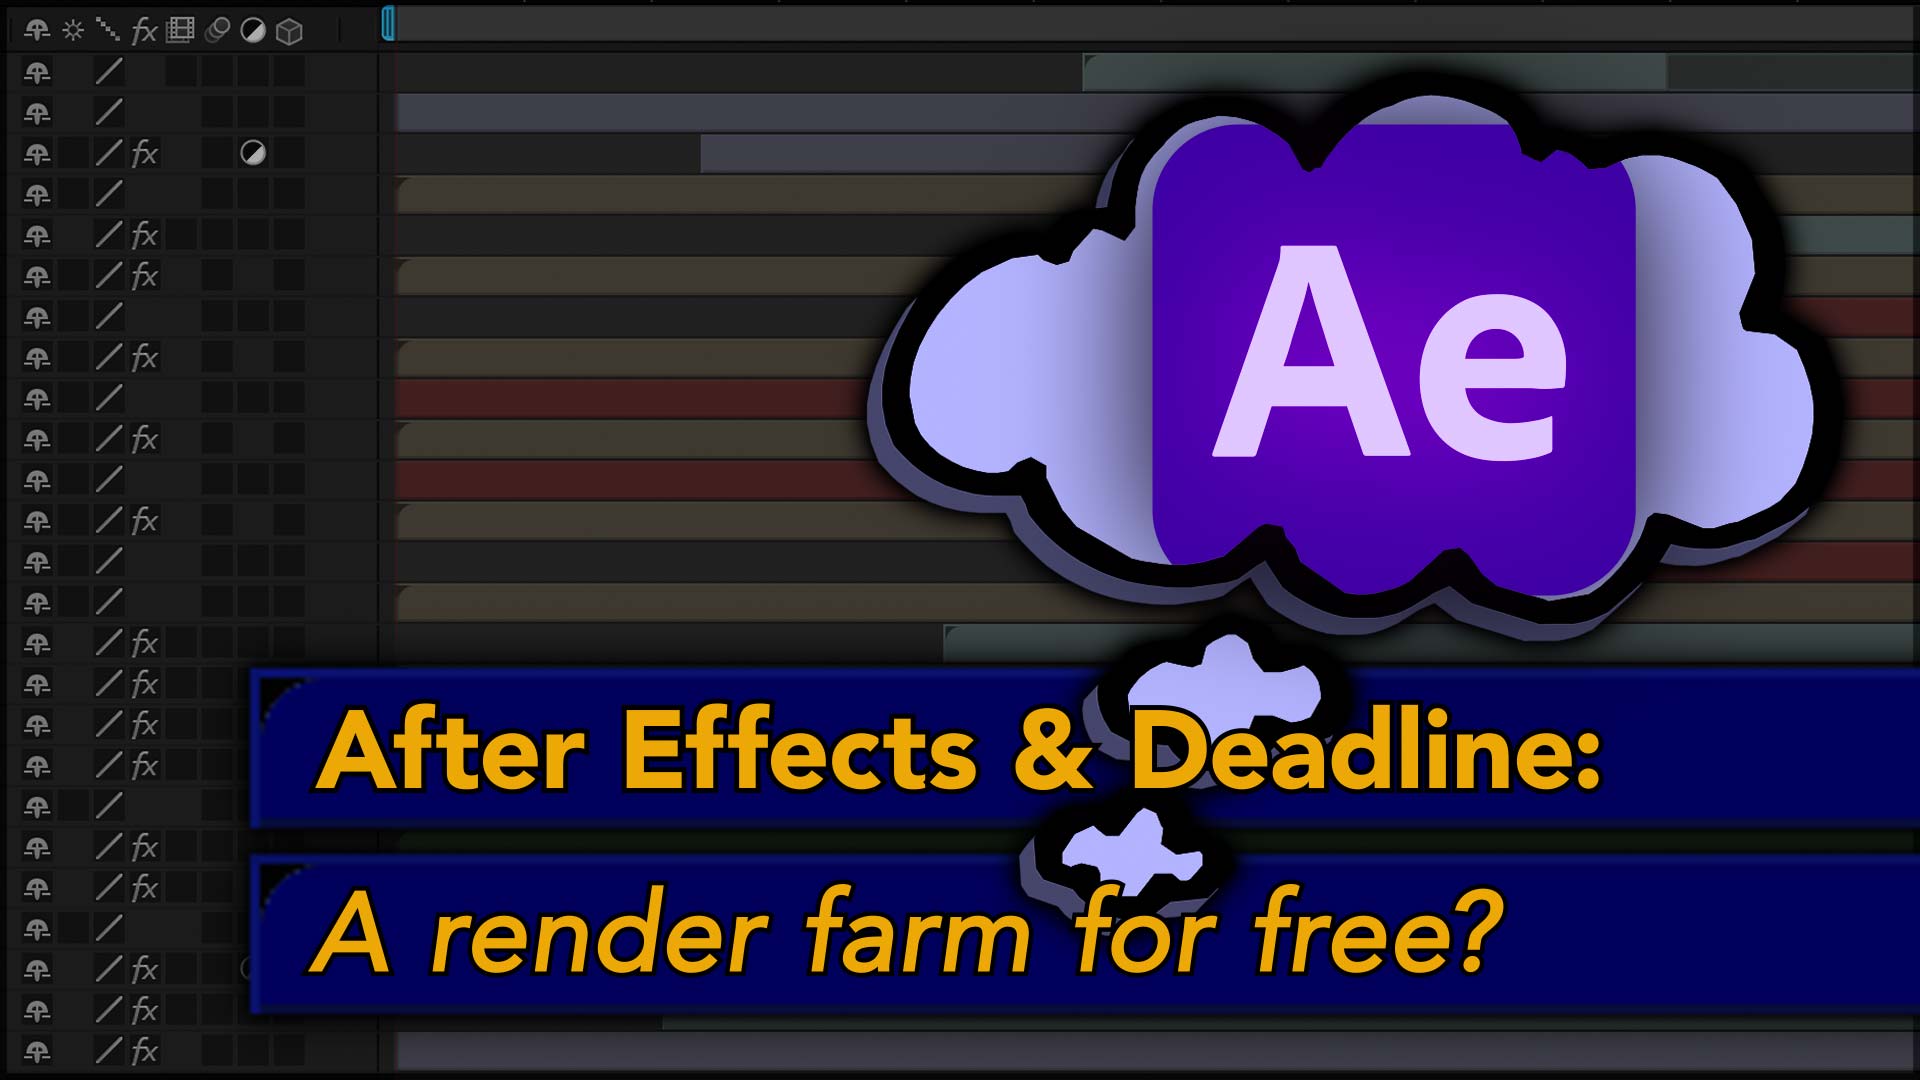 After Effects: Using Deadline for a Render Farm 57